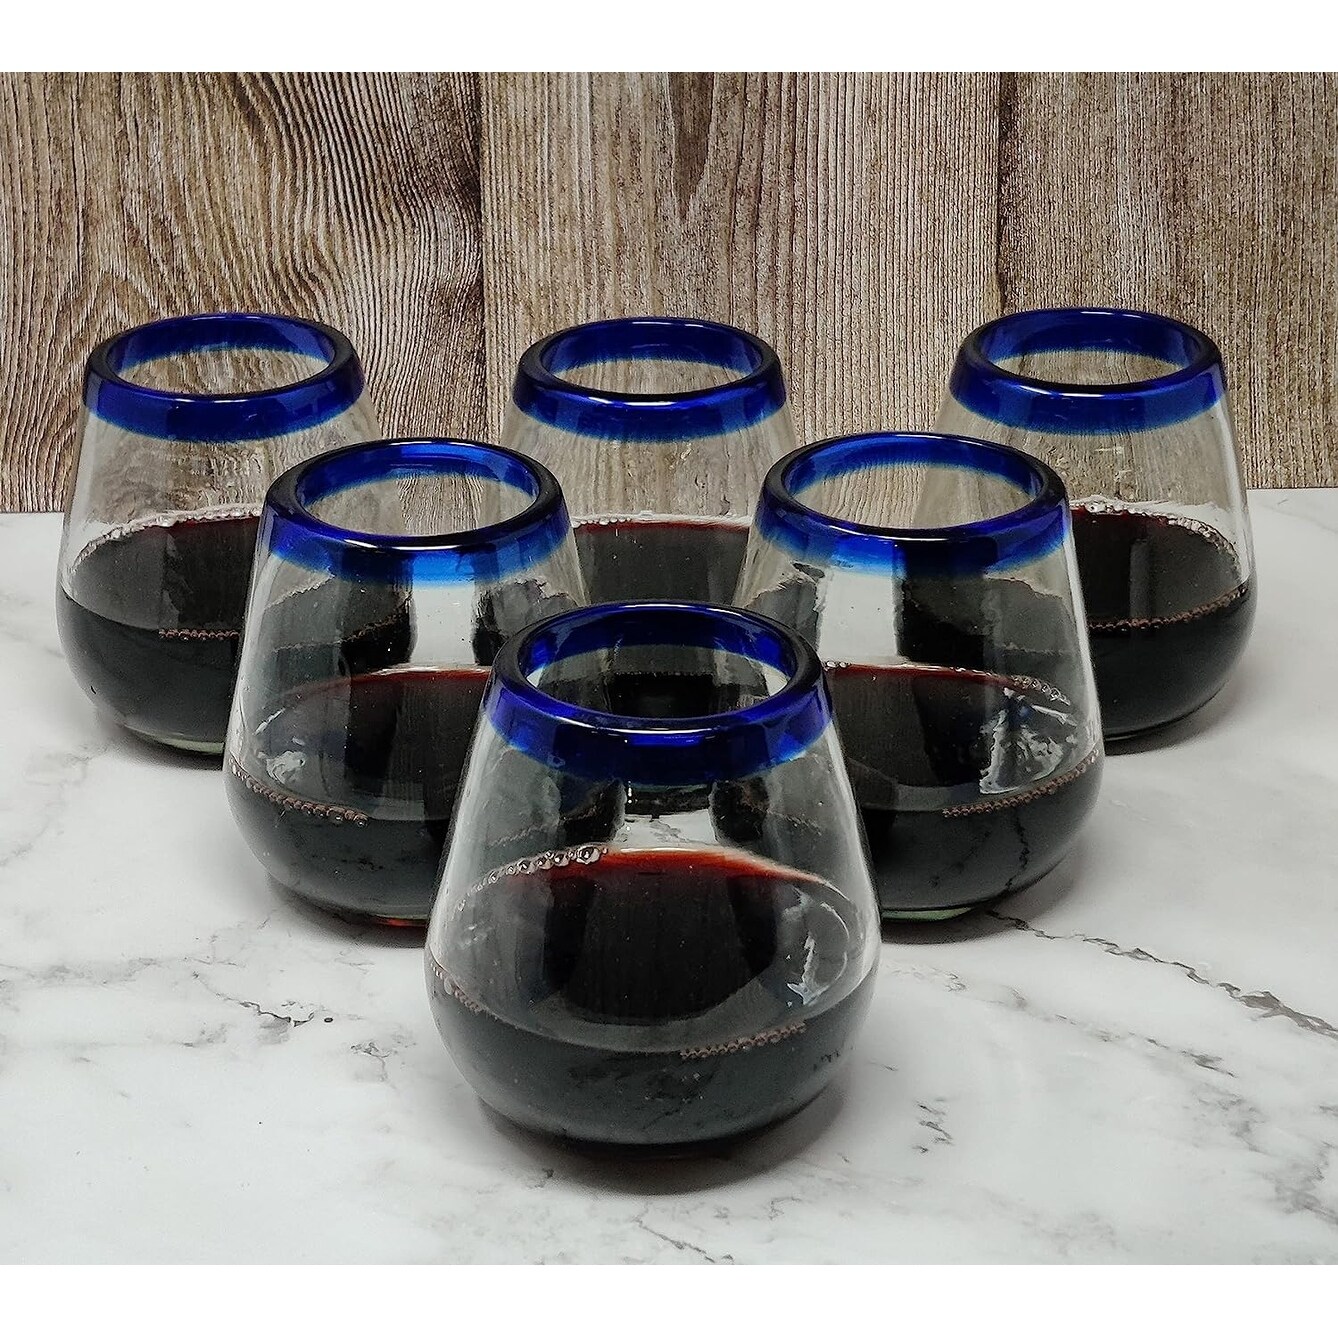 https://ak1.ostkcdn.com/images/products/is/images/direct/60ac70ce4bc95635351f6bcb338a09fd92894227/Hand-Blown-Mexican-Stemless-Wine-Glasses---Set-of-6-Glasses-with-Cobalt-Blue-Rims-%2815-oz%29.jpg